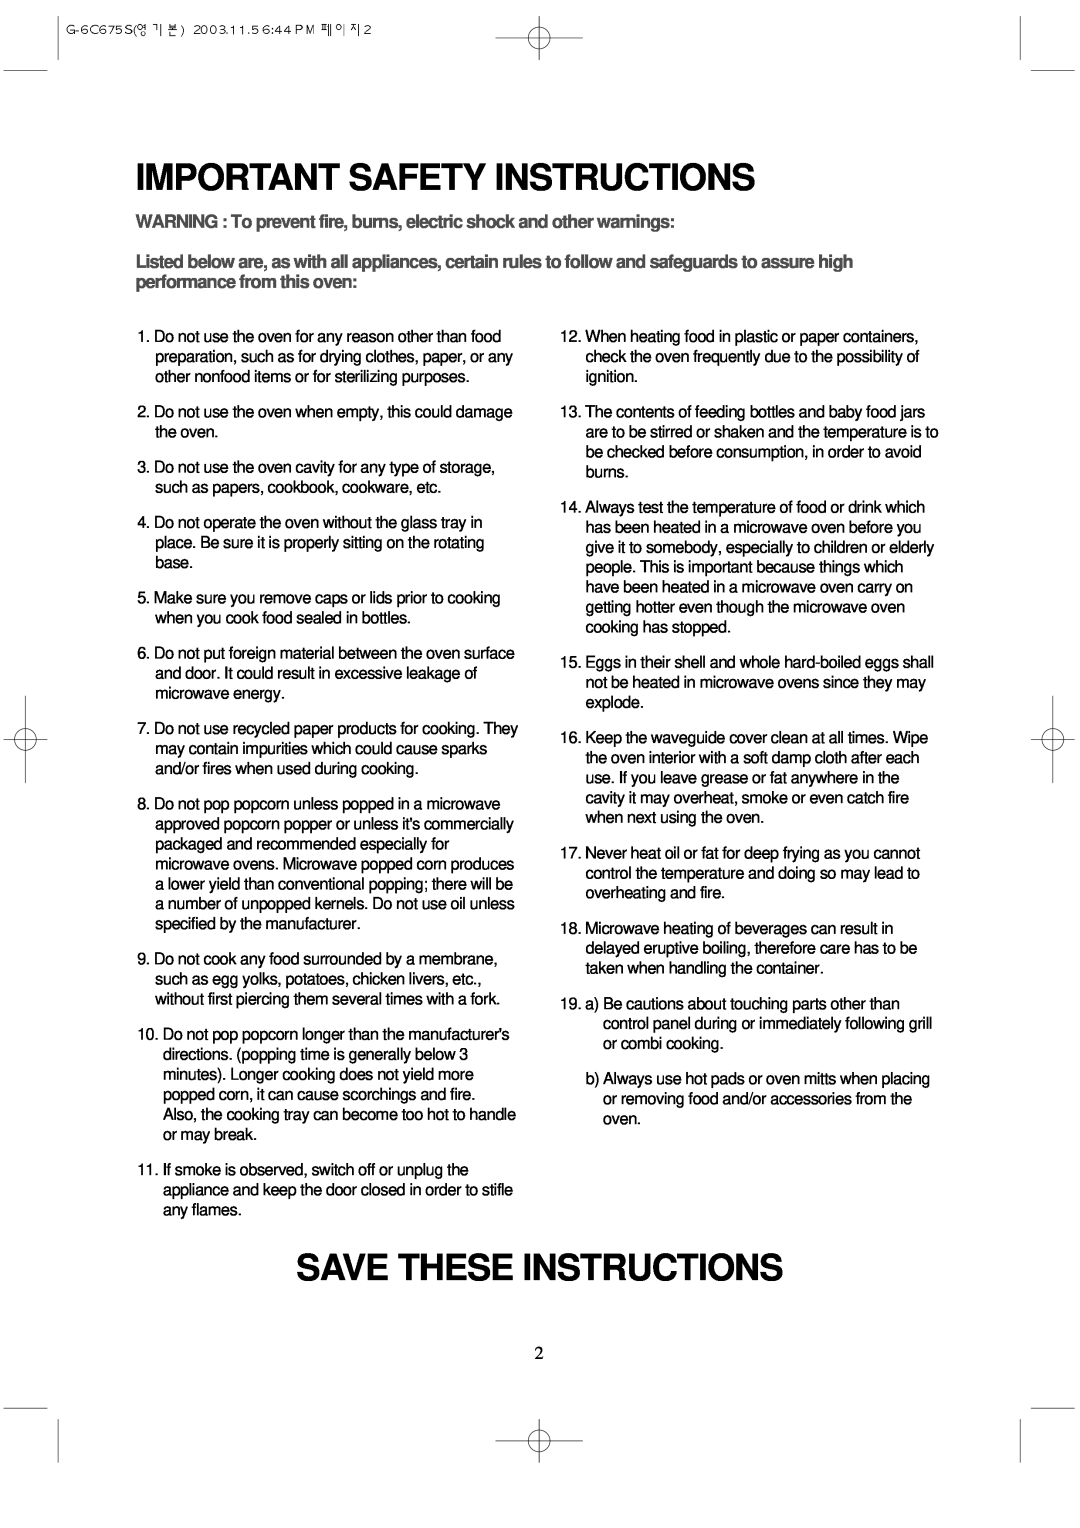 Daewoo KOG-3C675S manual Important Safety Instructions, Save These Instructions 